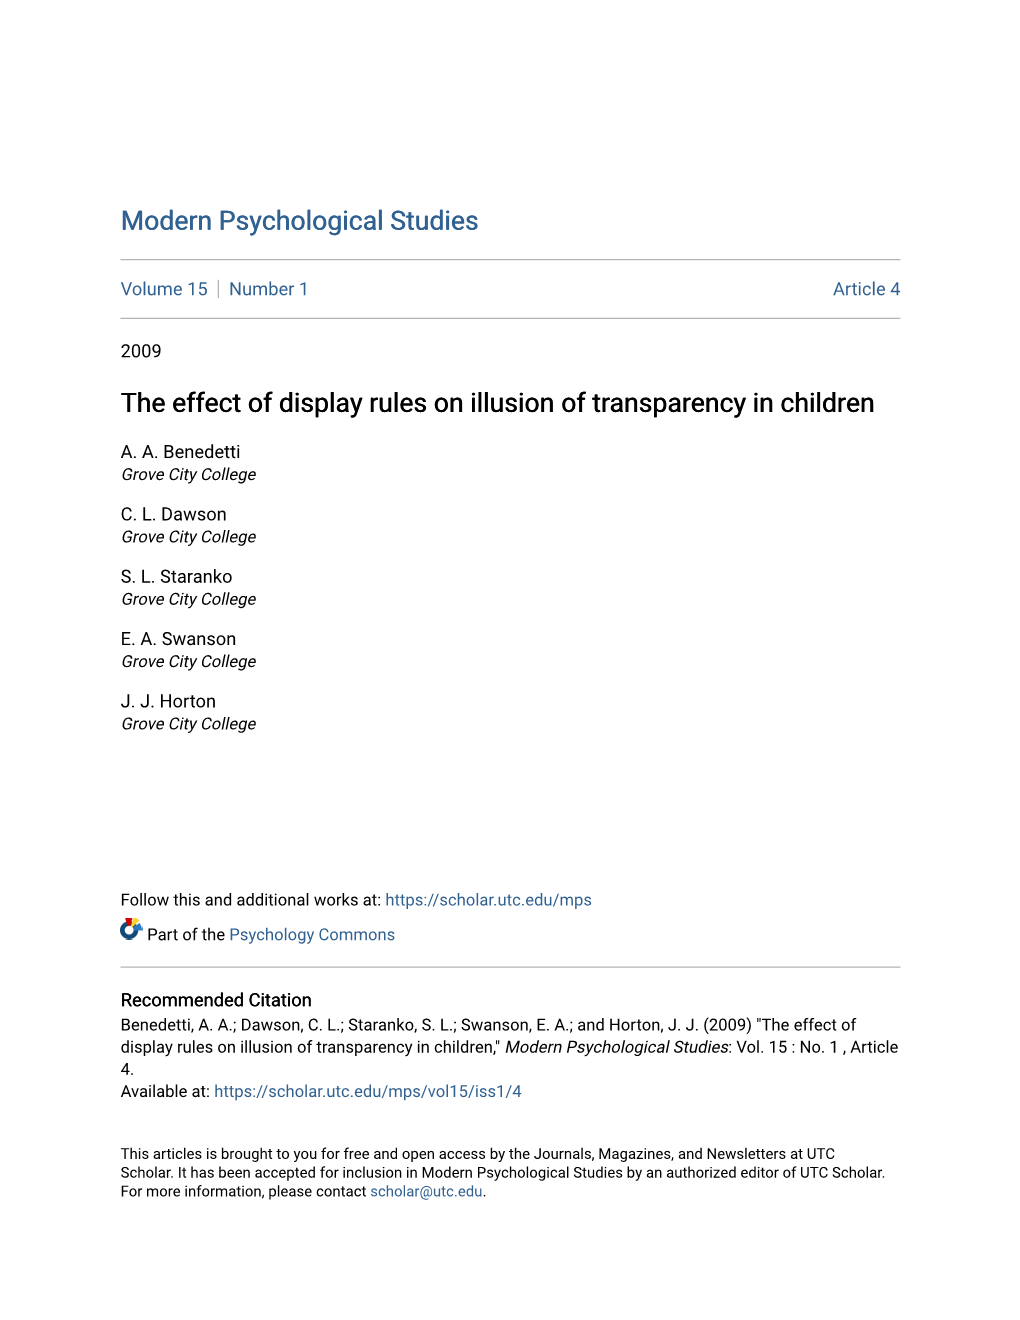 The Effect of Display Rules on Illusion of Transparency in Children